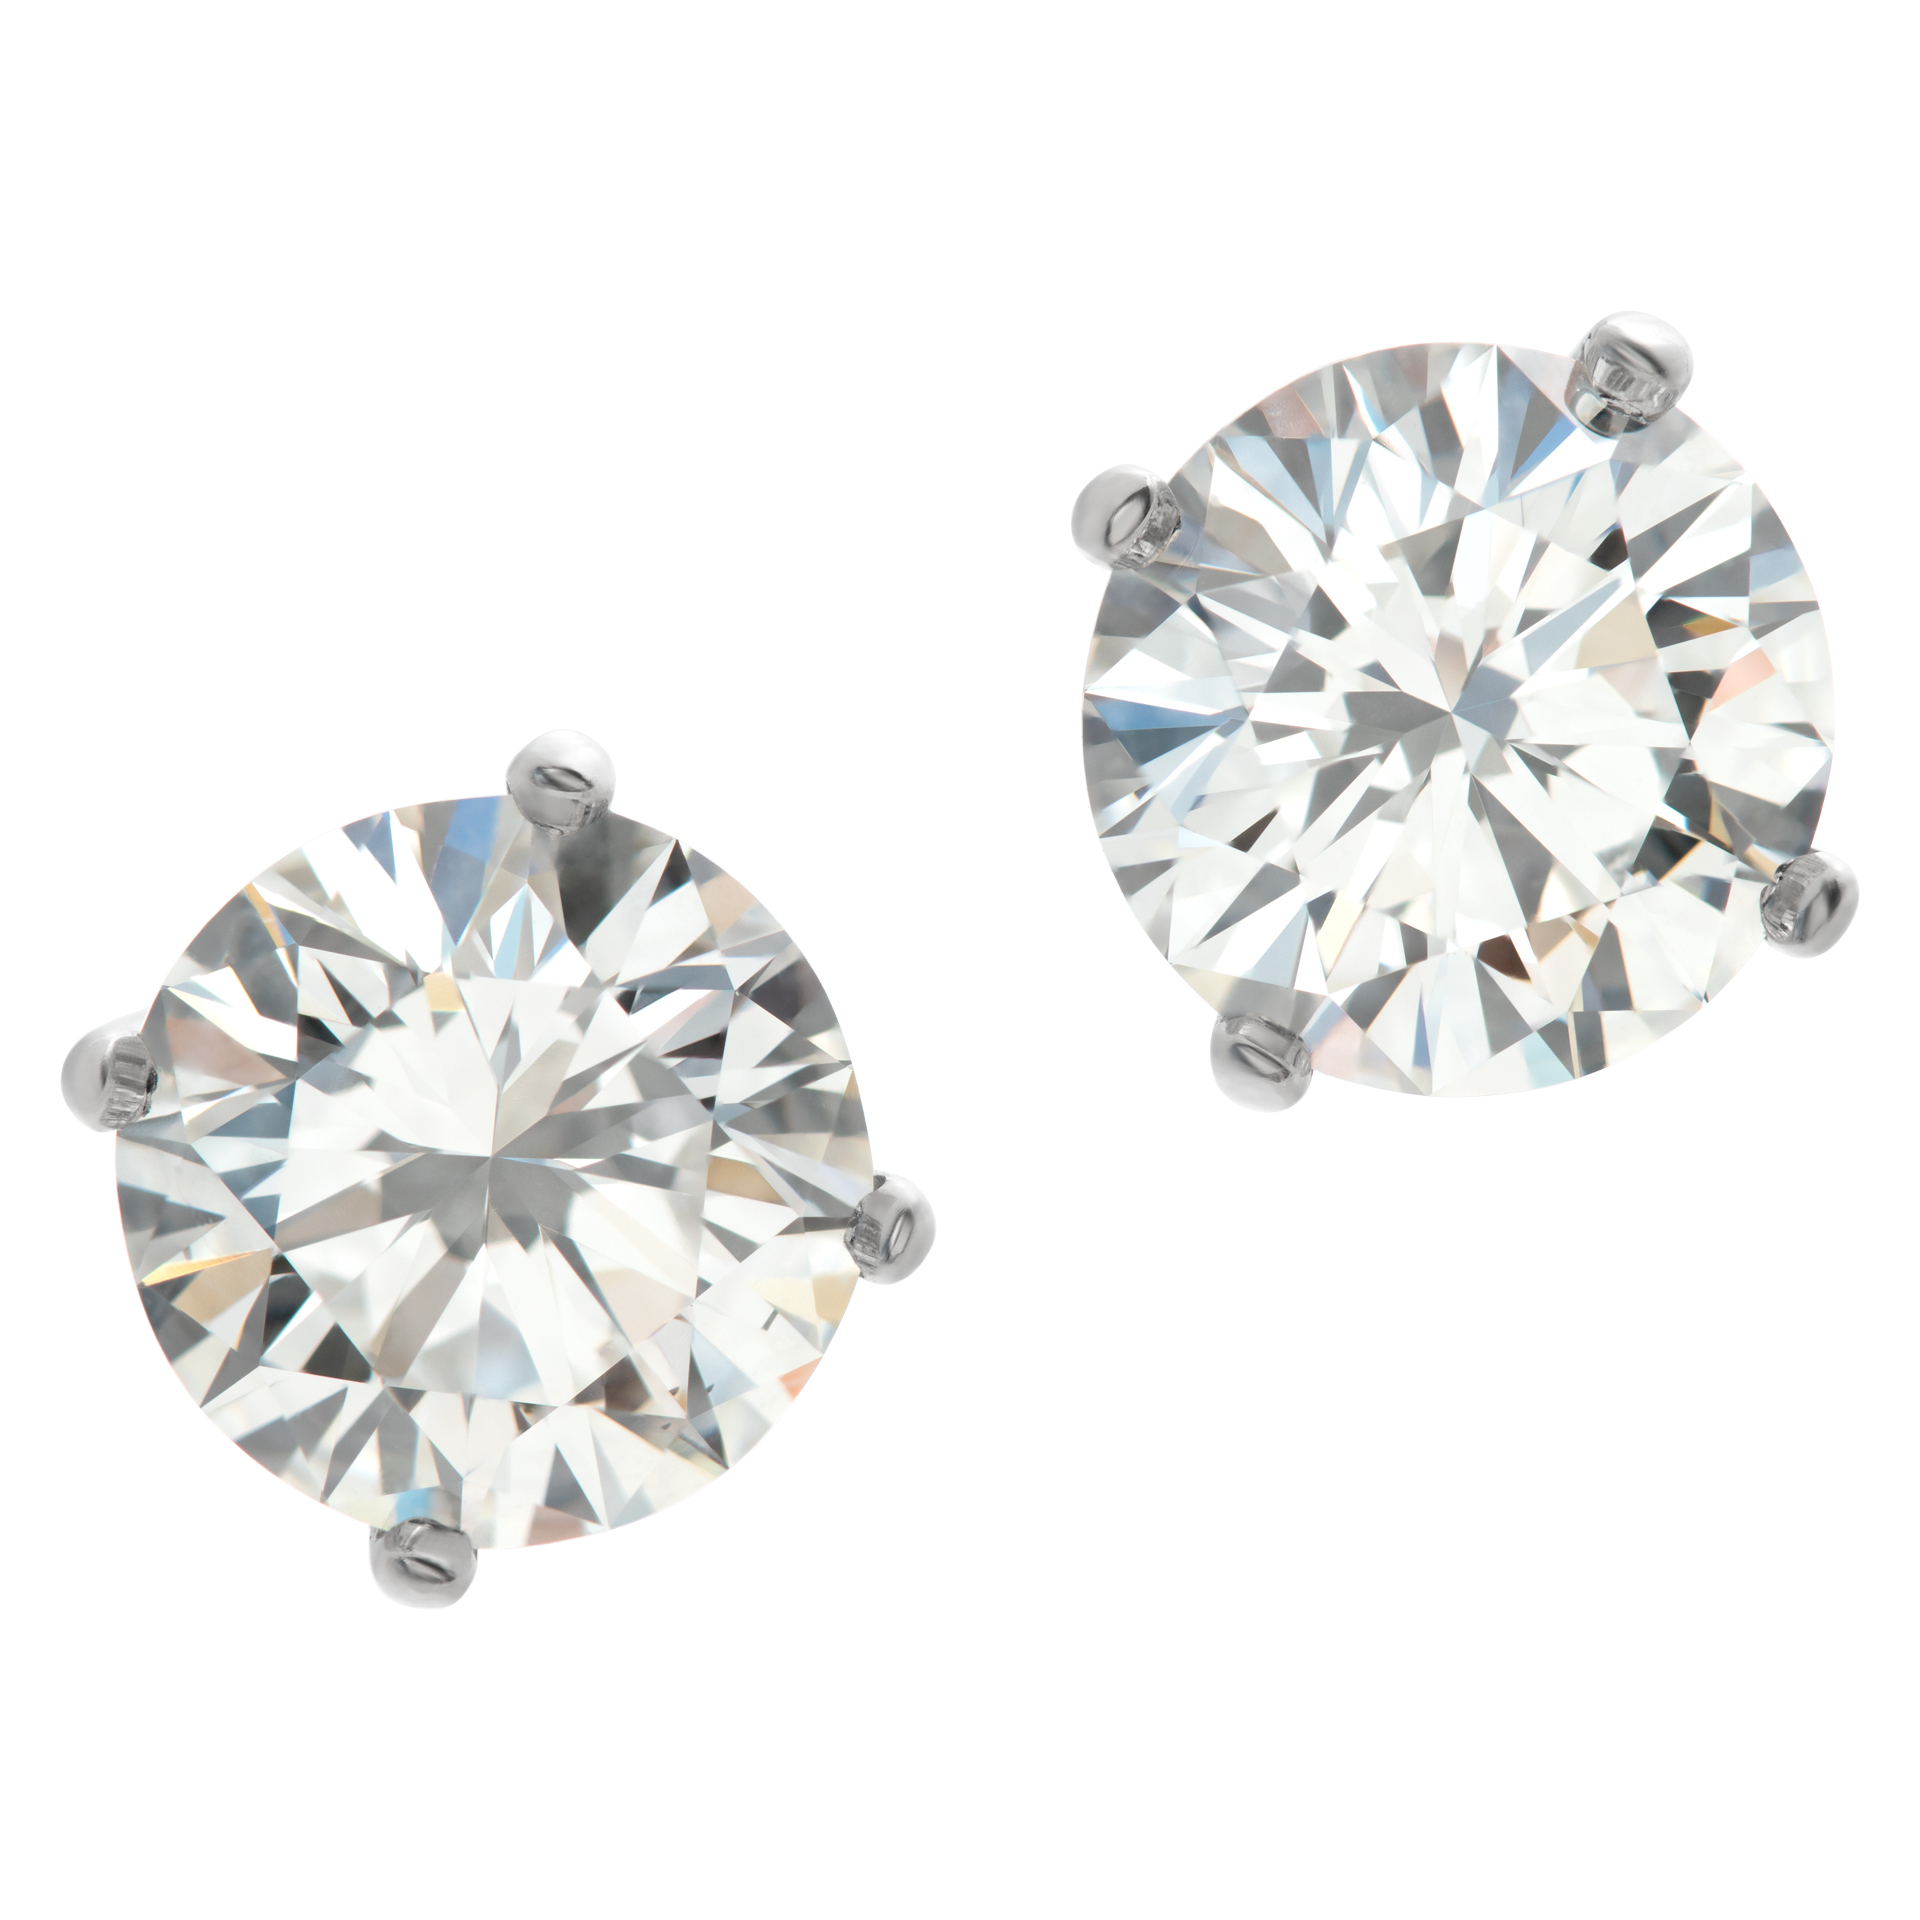 GIA certified round brilliant cut diamond studs 1.10 carat (H color, I2 clarity) and 1.03 carat (I color, SI1 clarity)